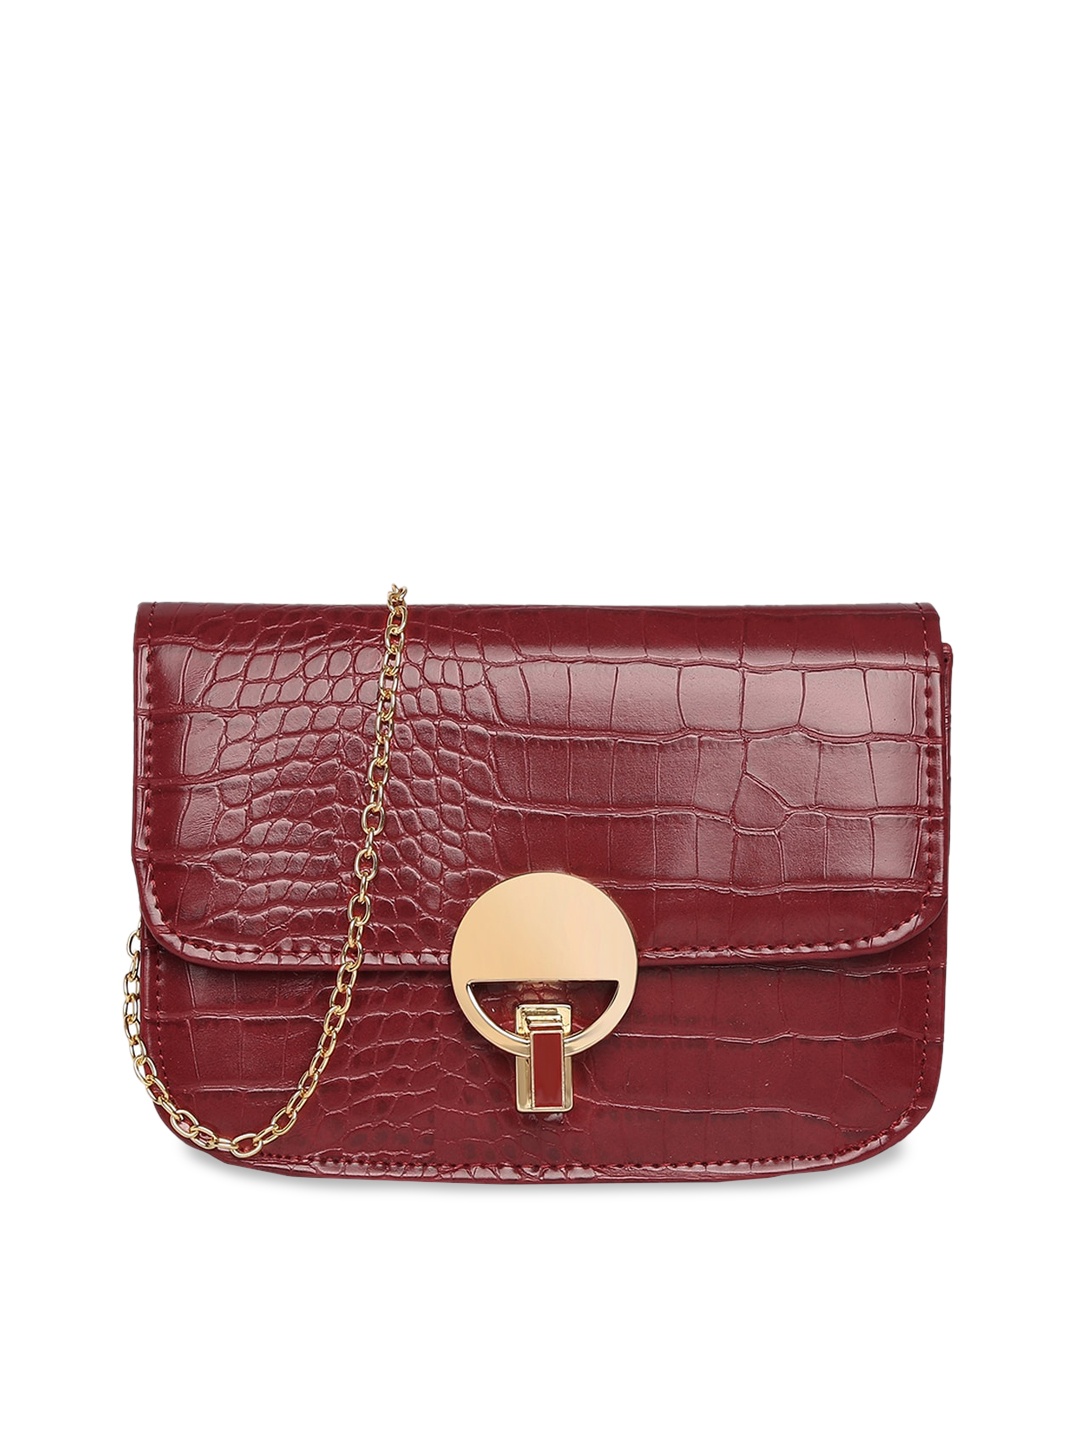 

Accessorize London Women Faux Leather Croc Textured Lock Chain Sling Bag, Red